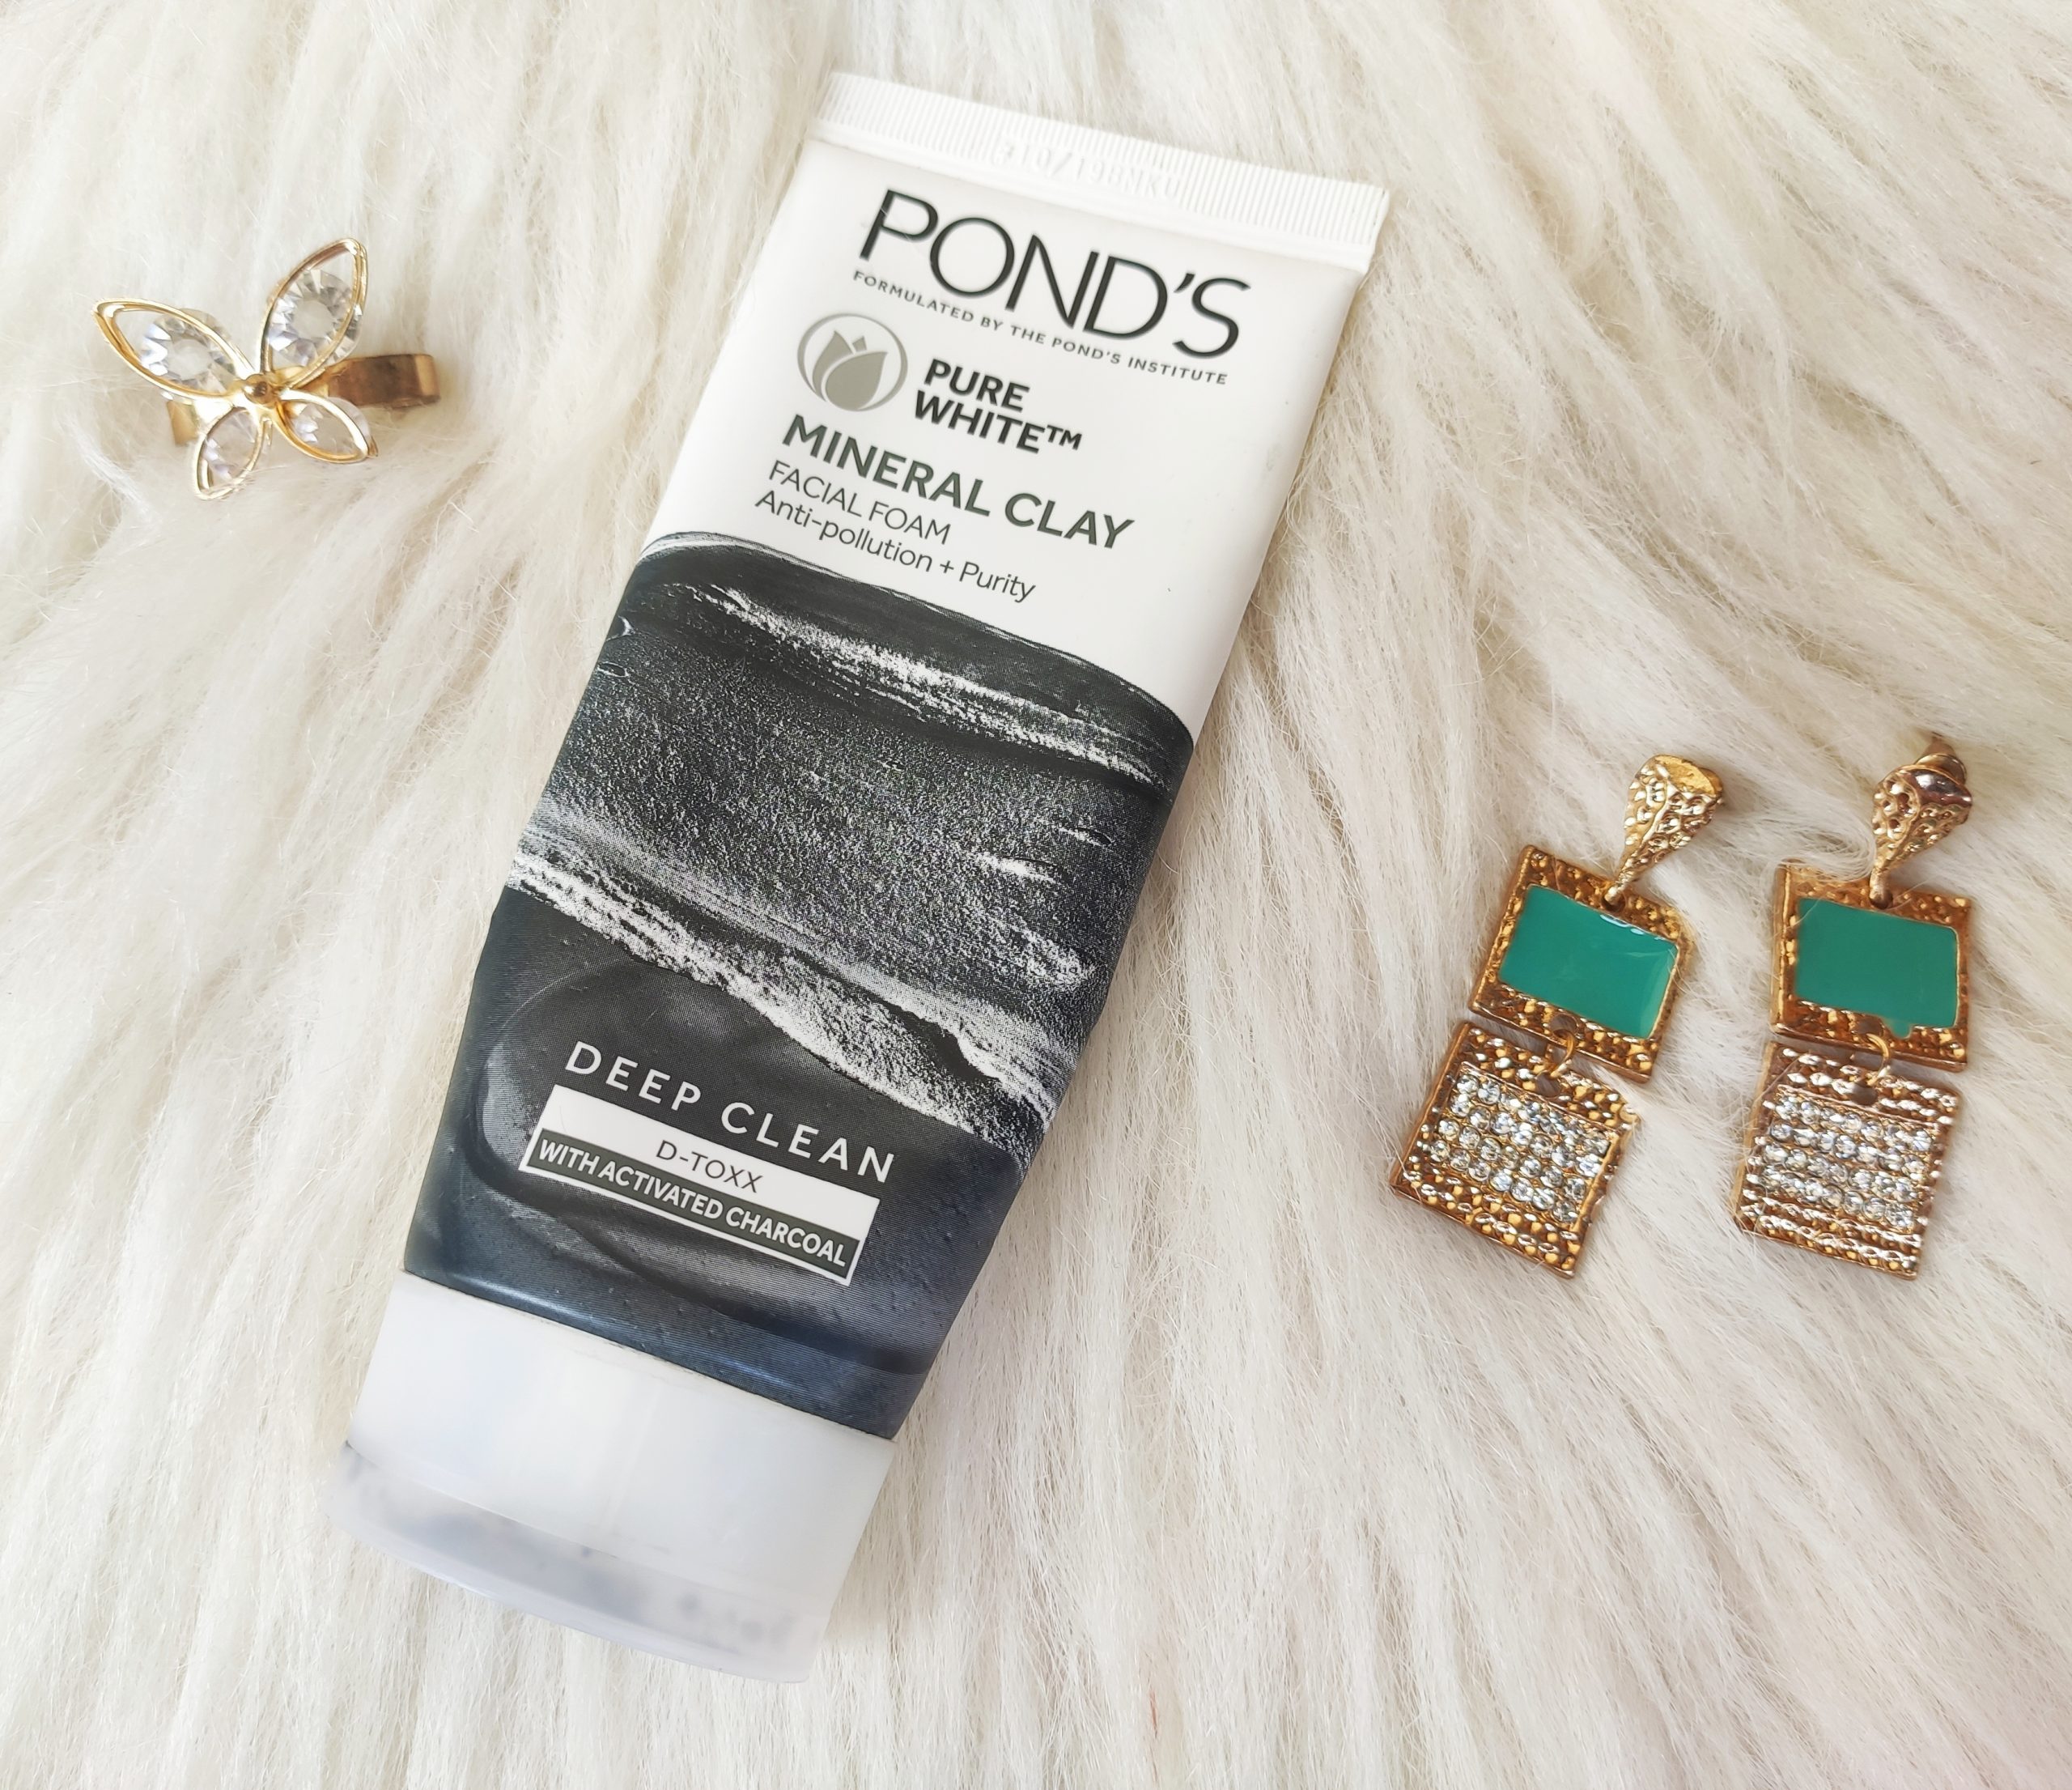 Pond’s Pure White Mineral Clay Foam| Review